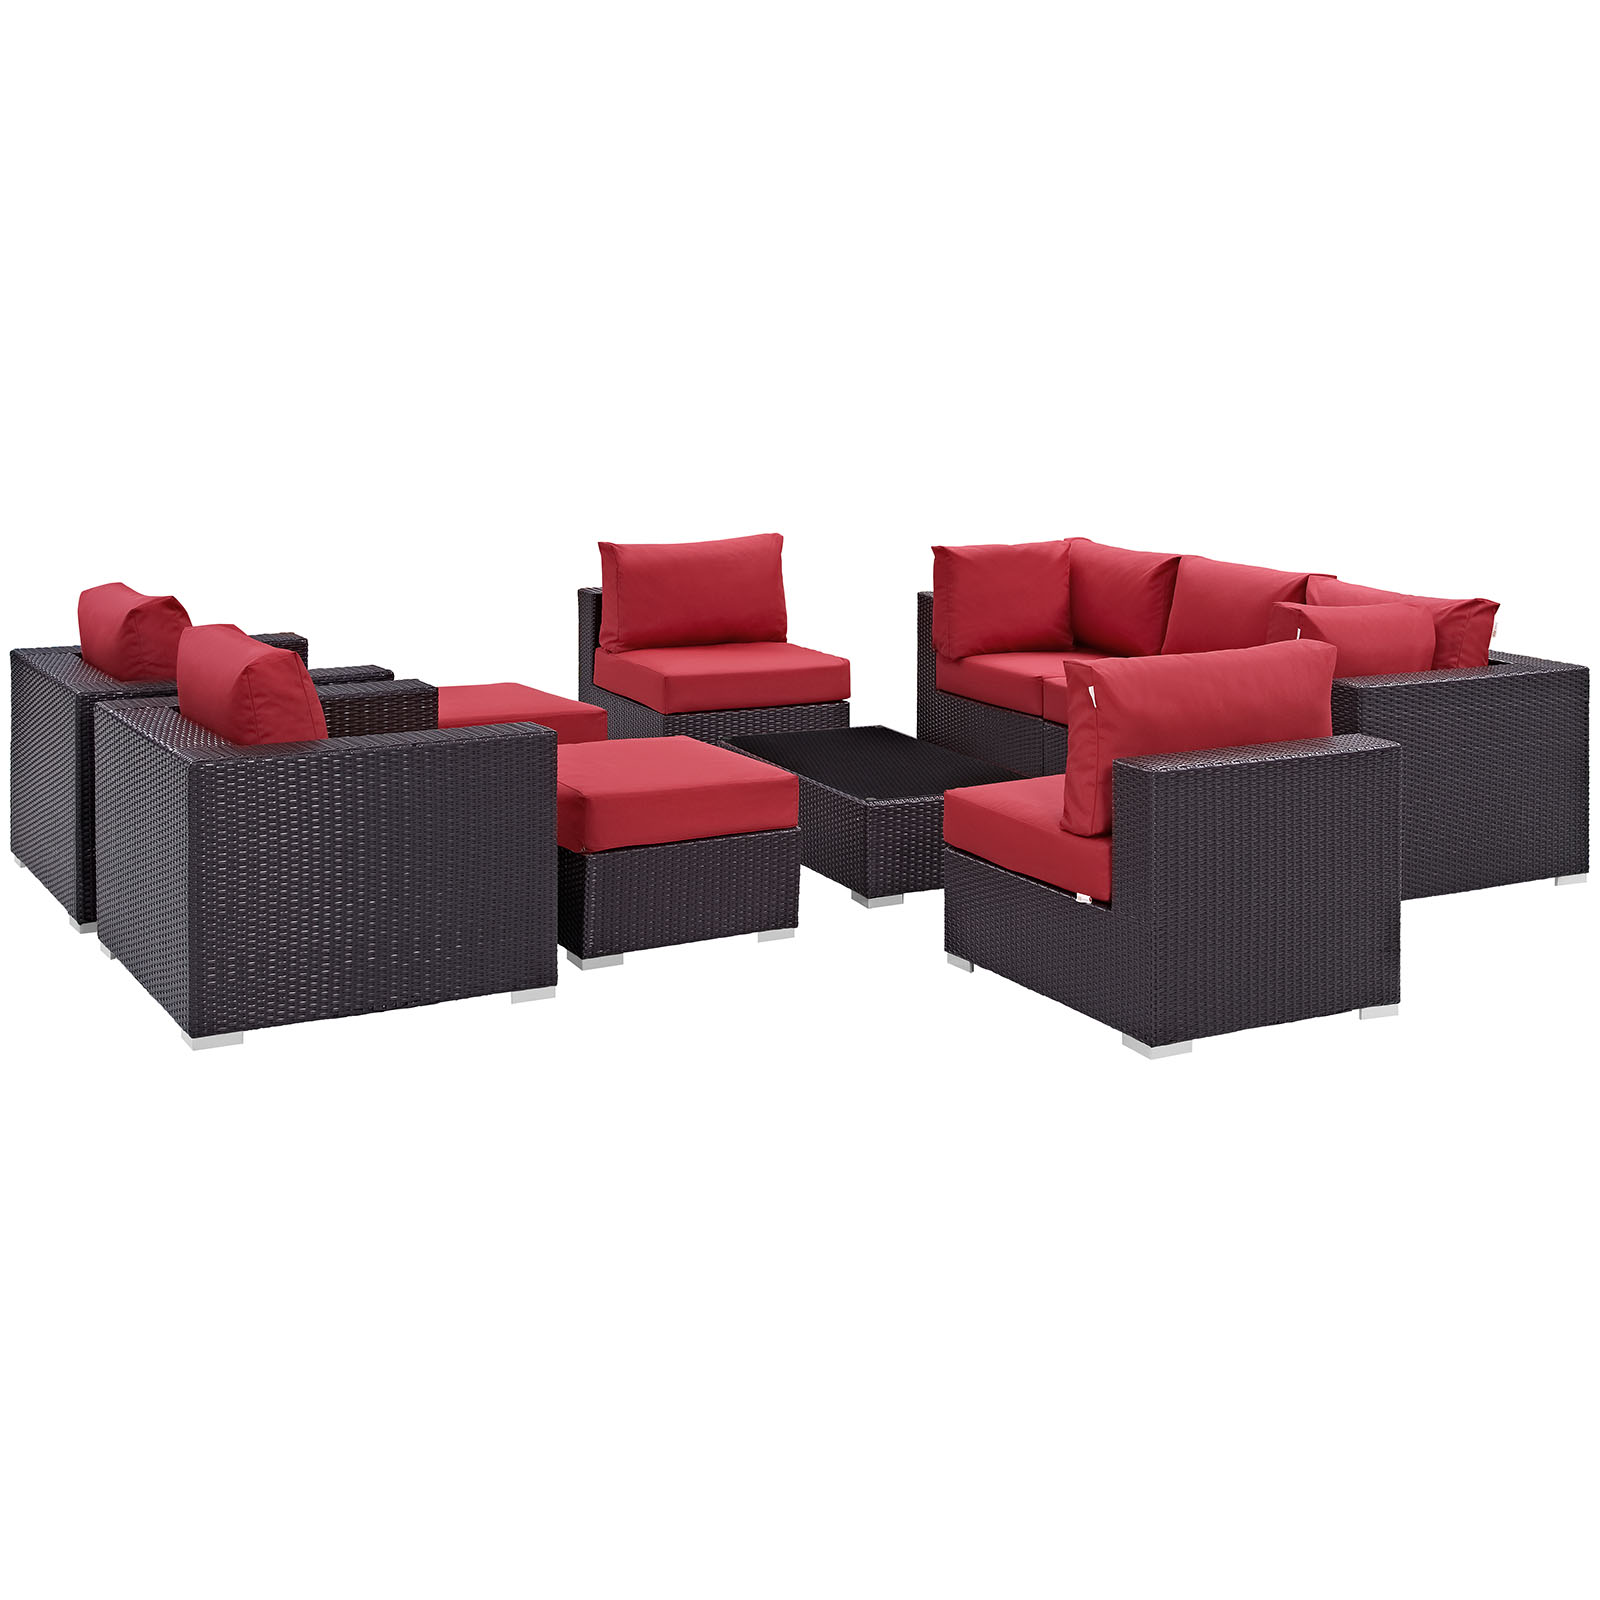 Modway Convene 10 Piece Outdoor Patio Sectional Set in Espresso Red - image 3 of 9